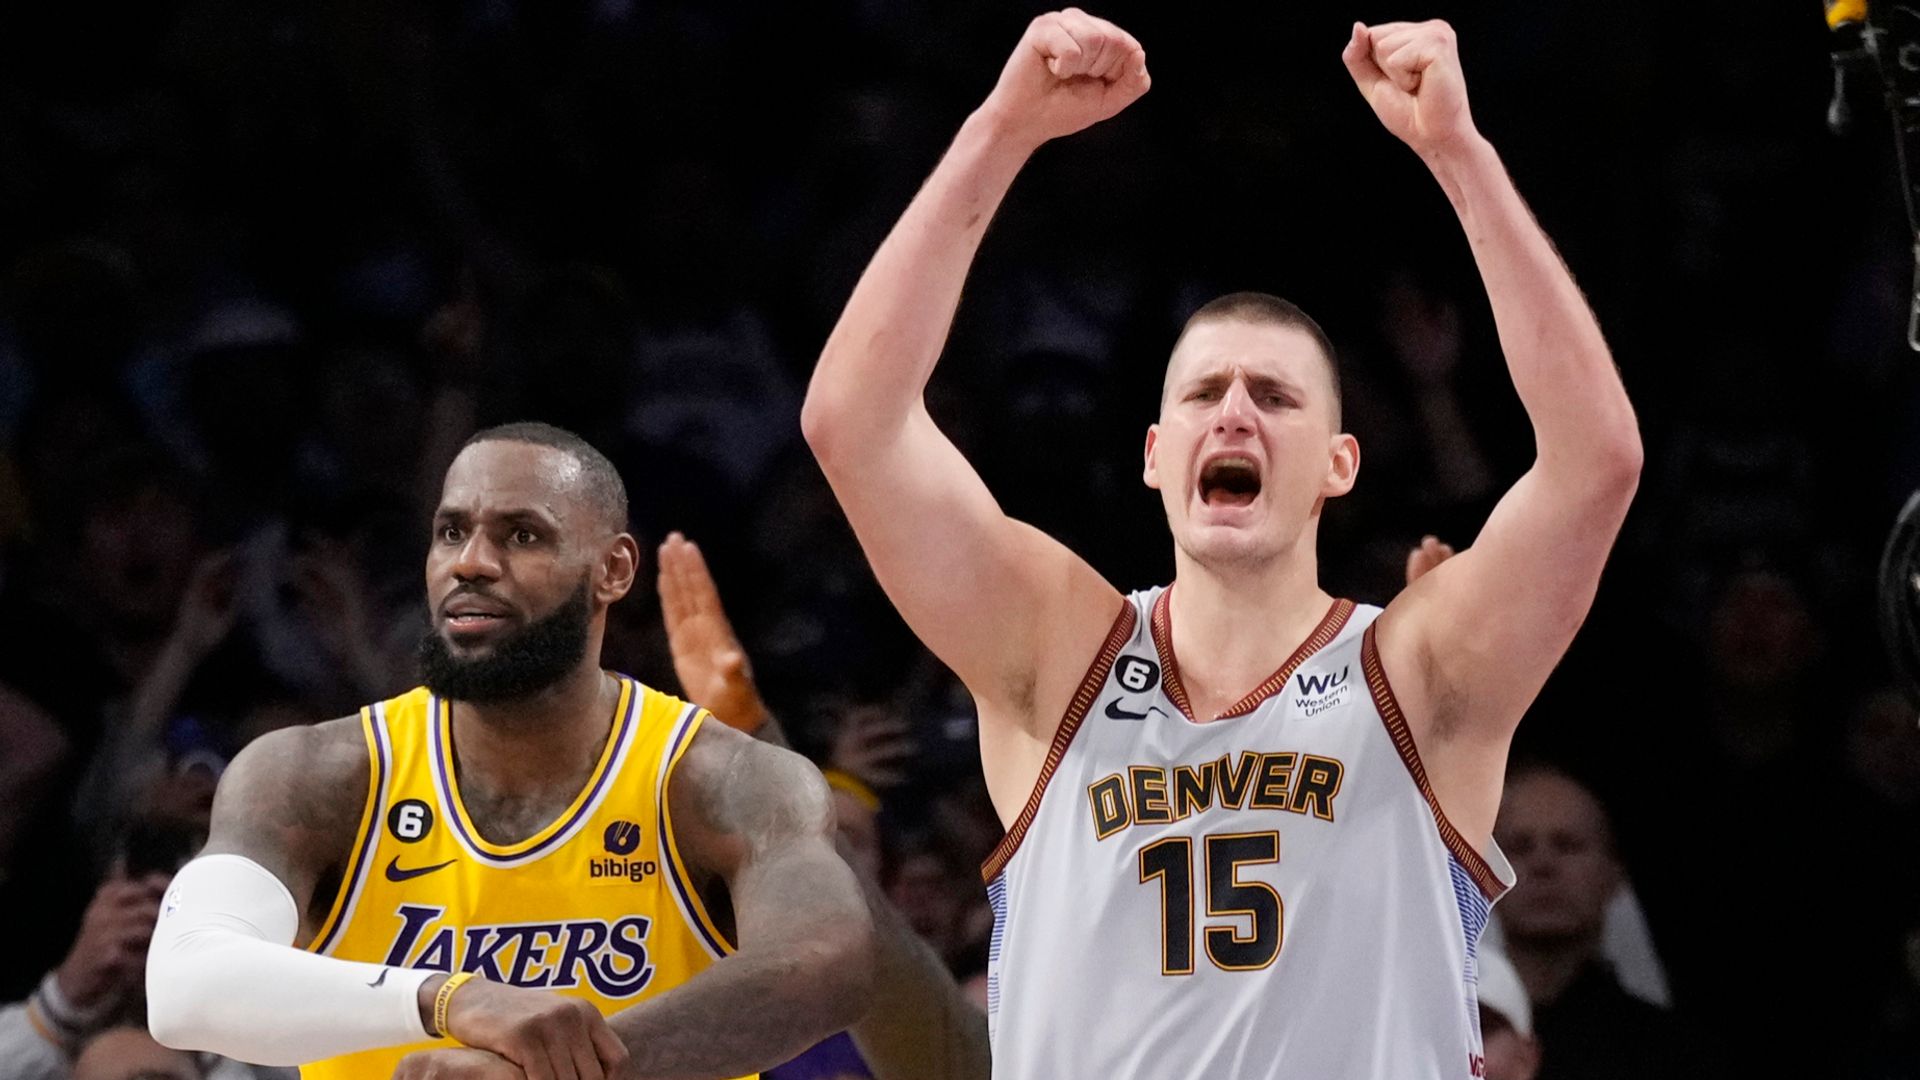 Jokic leads Nuggets to sweep of LeBron's Lakers and into first NBA Finals